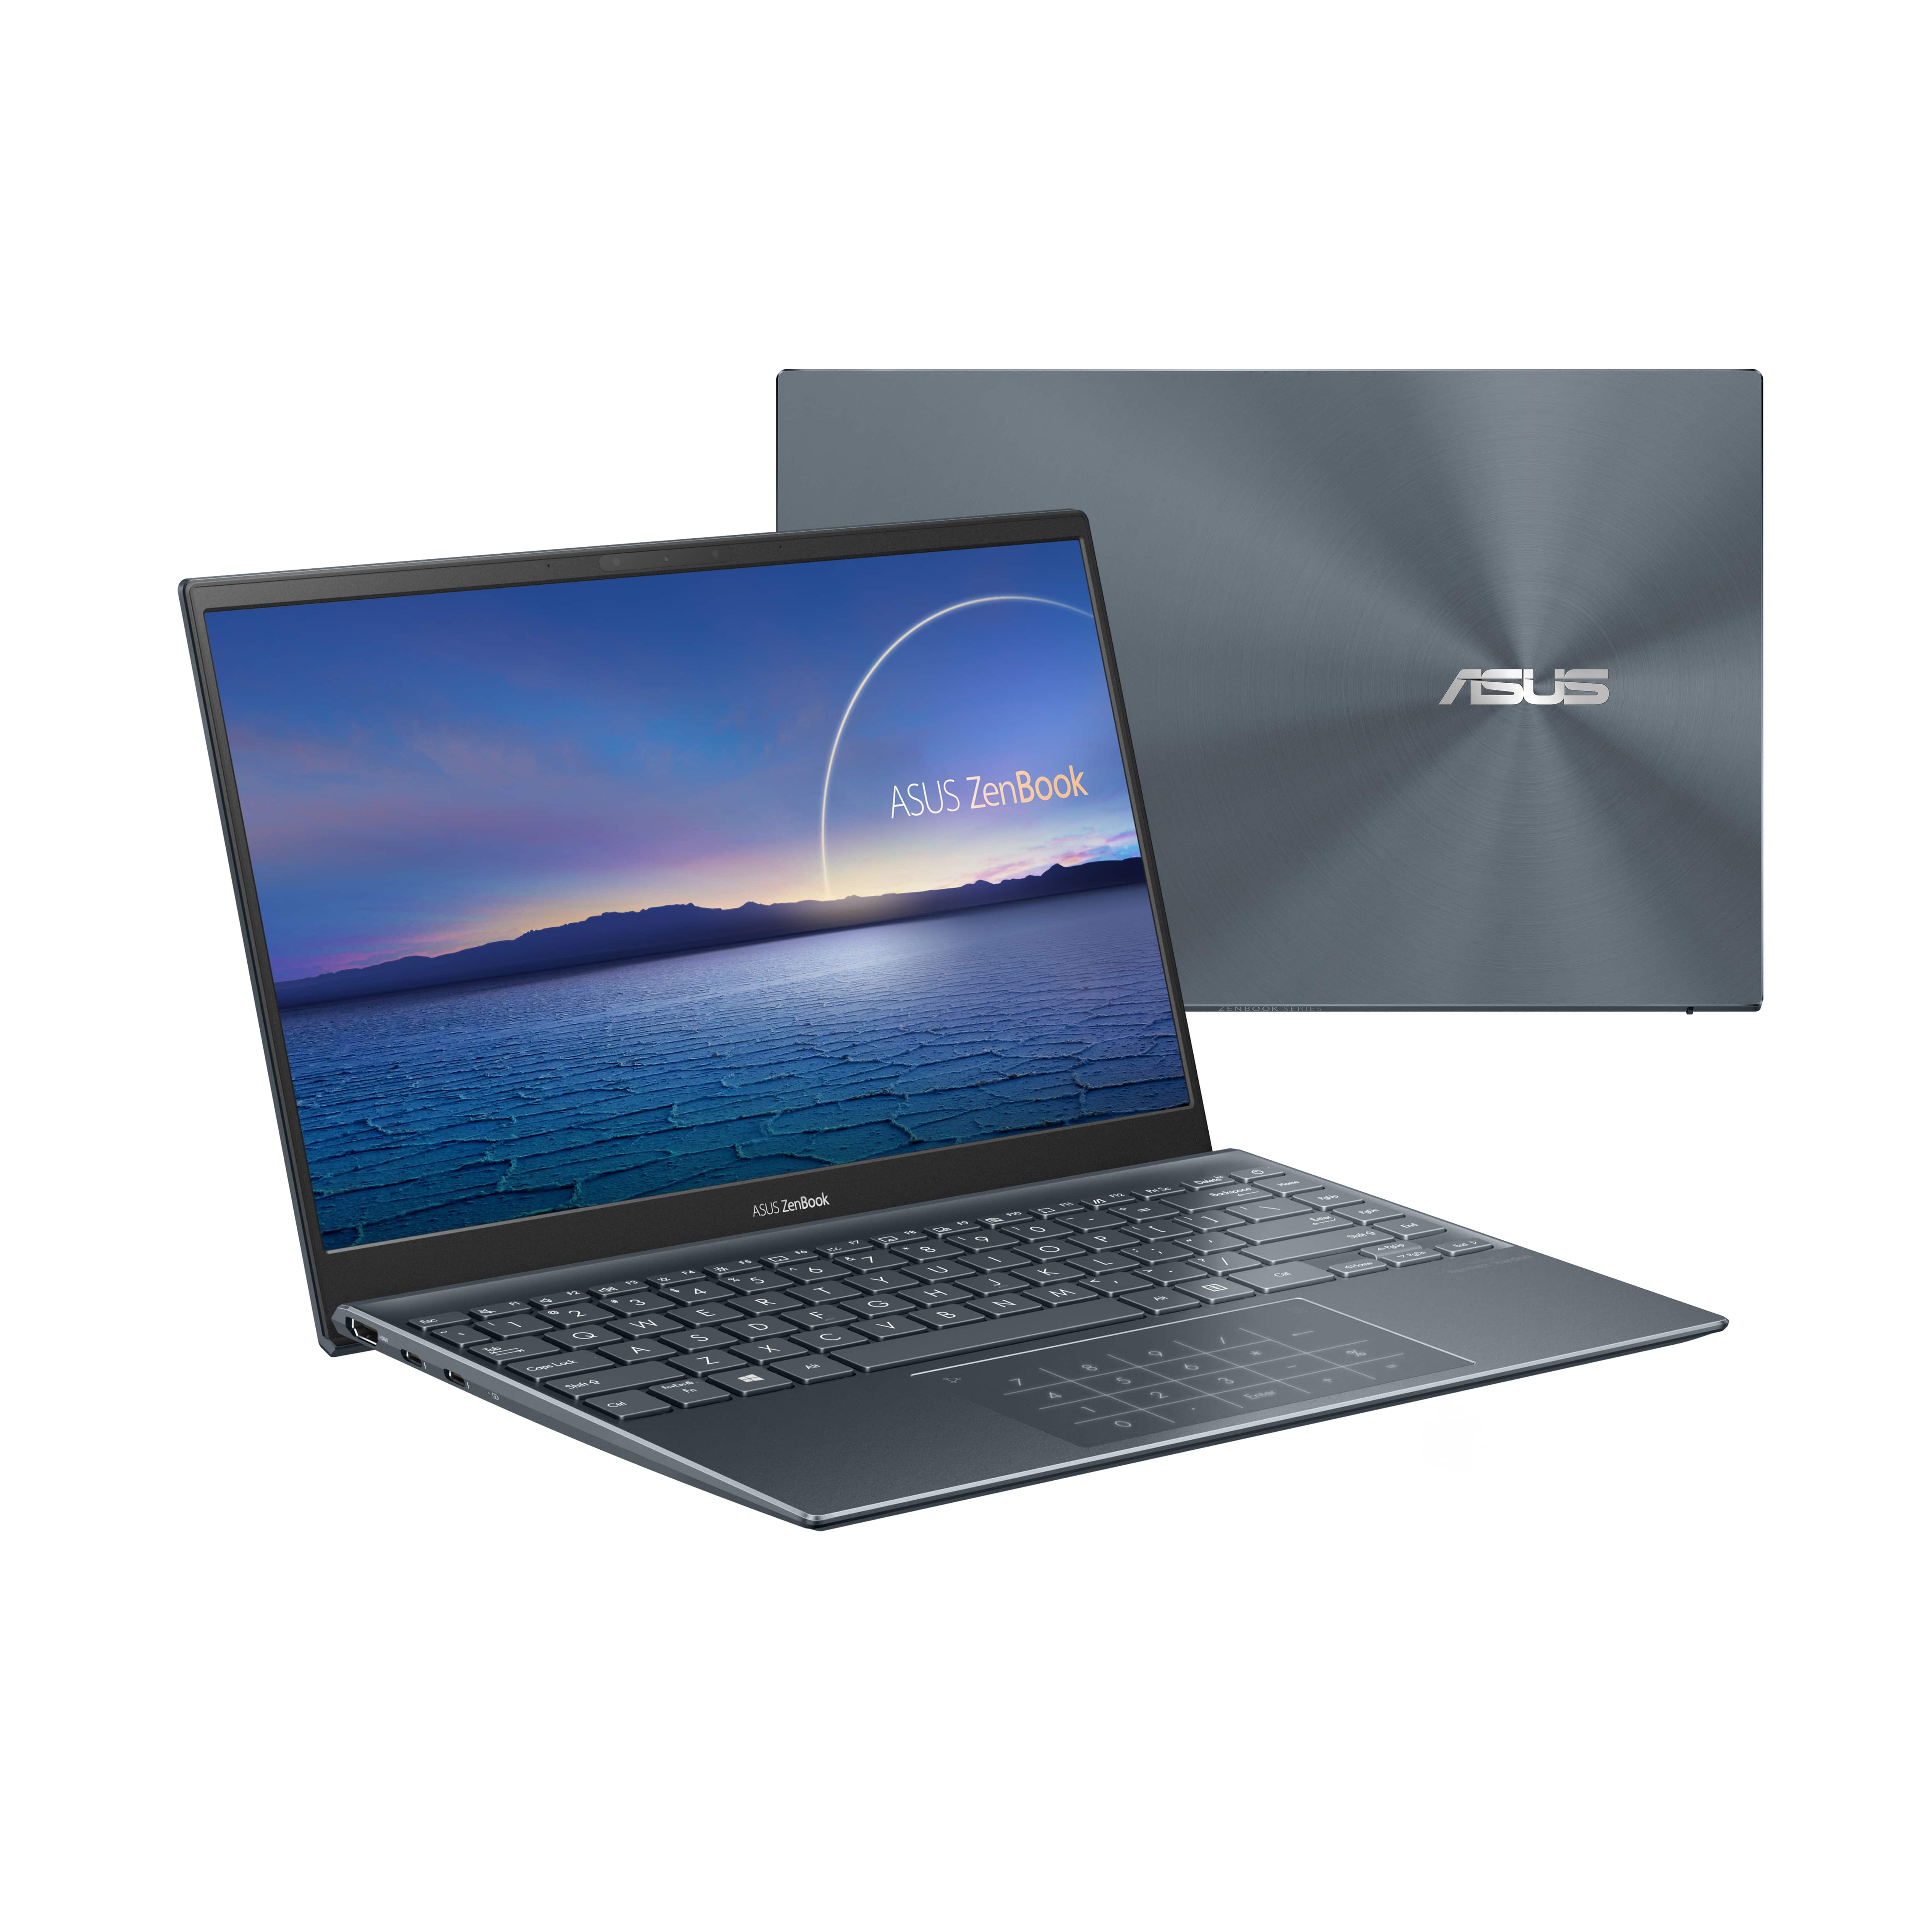 Asus Launches New Zenbook Vivobook Models In India Check Prices Features Of These Laptop